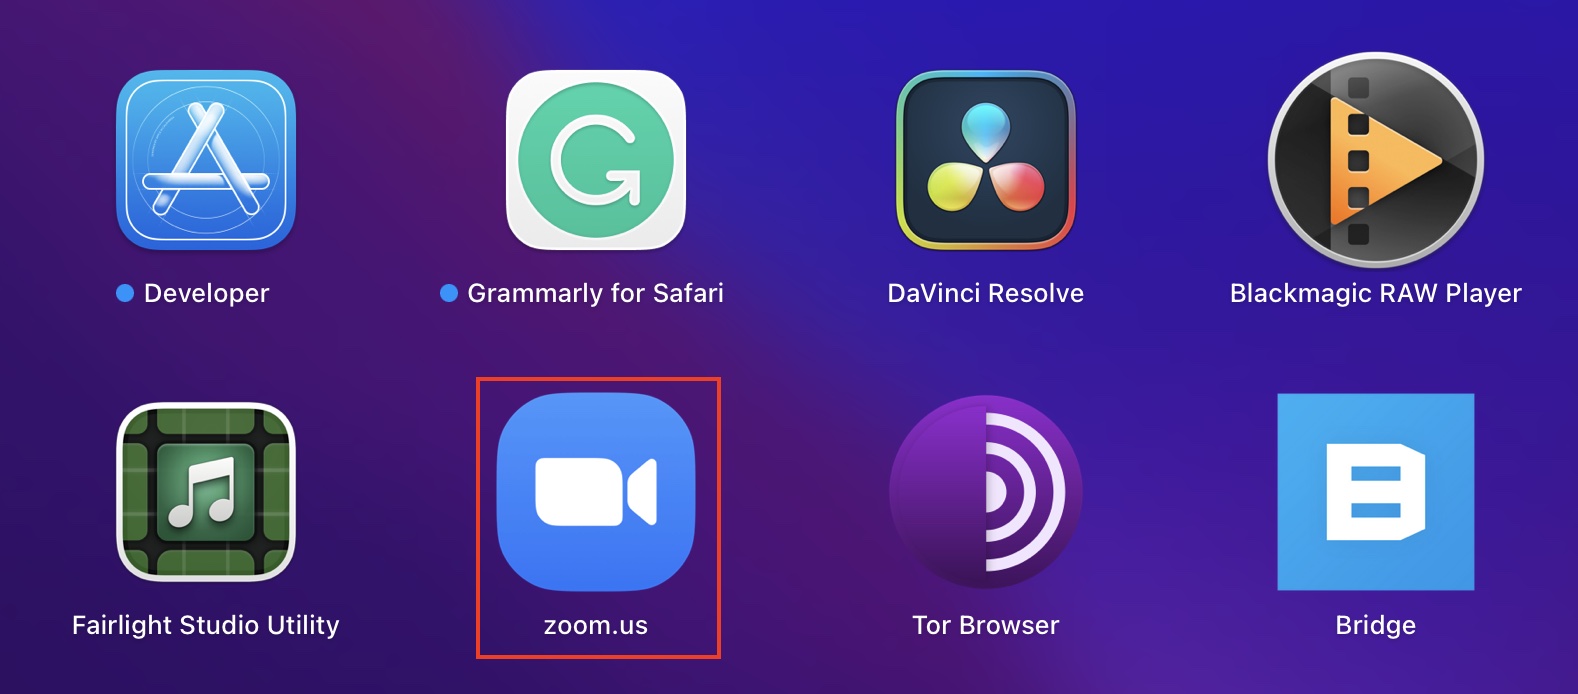 The quick and easy way to share your screen on the Zoom video conferencing app